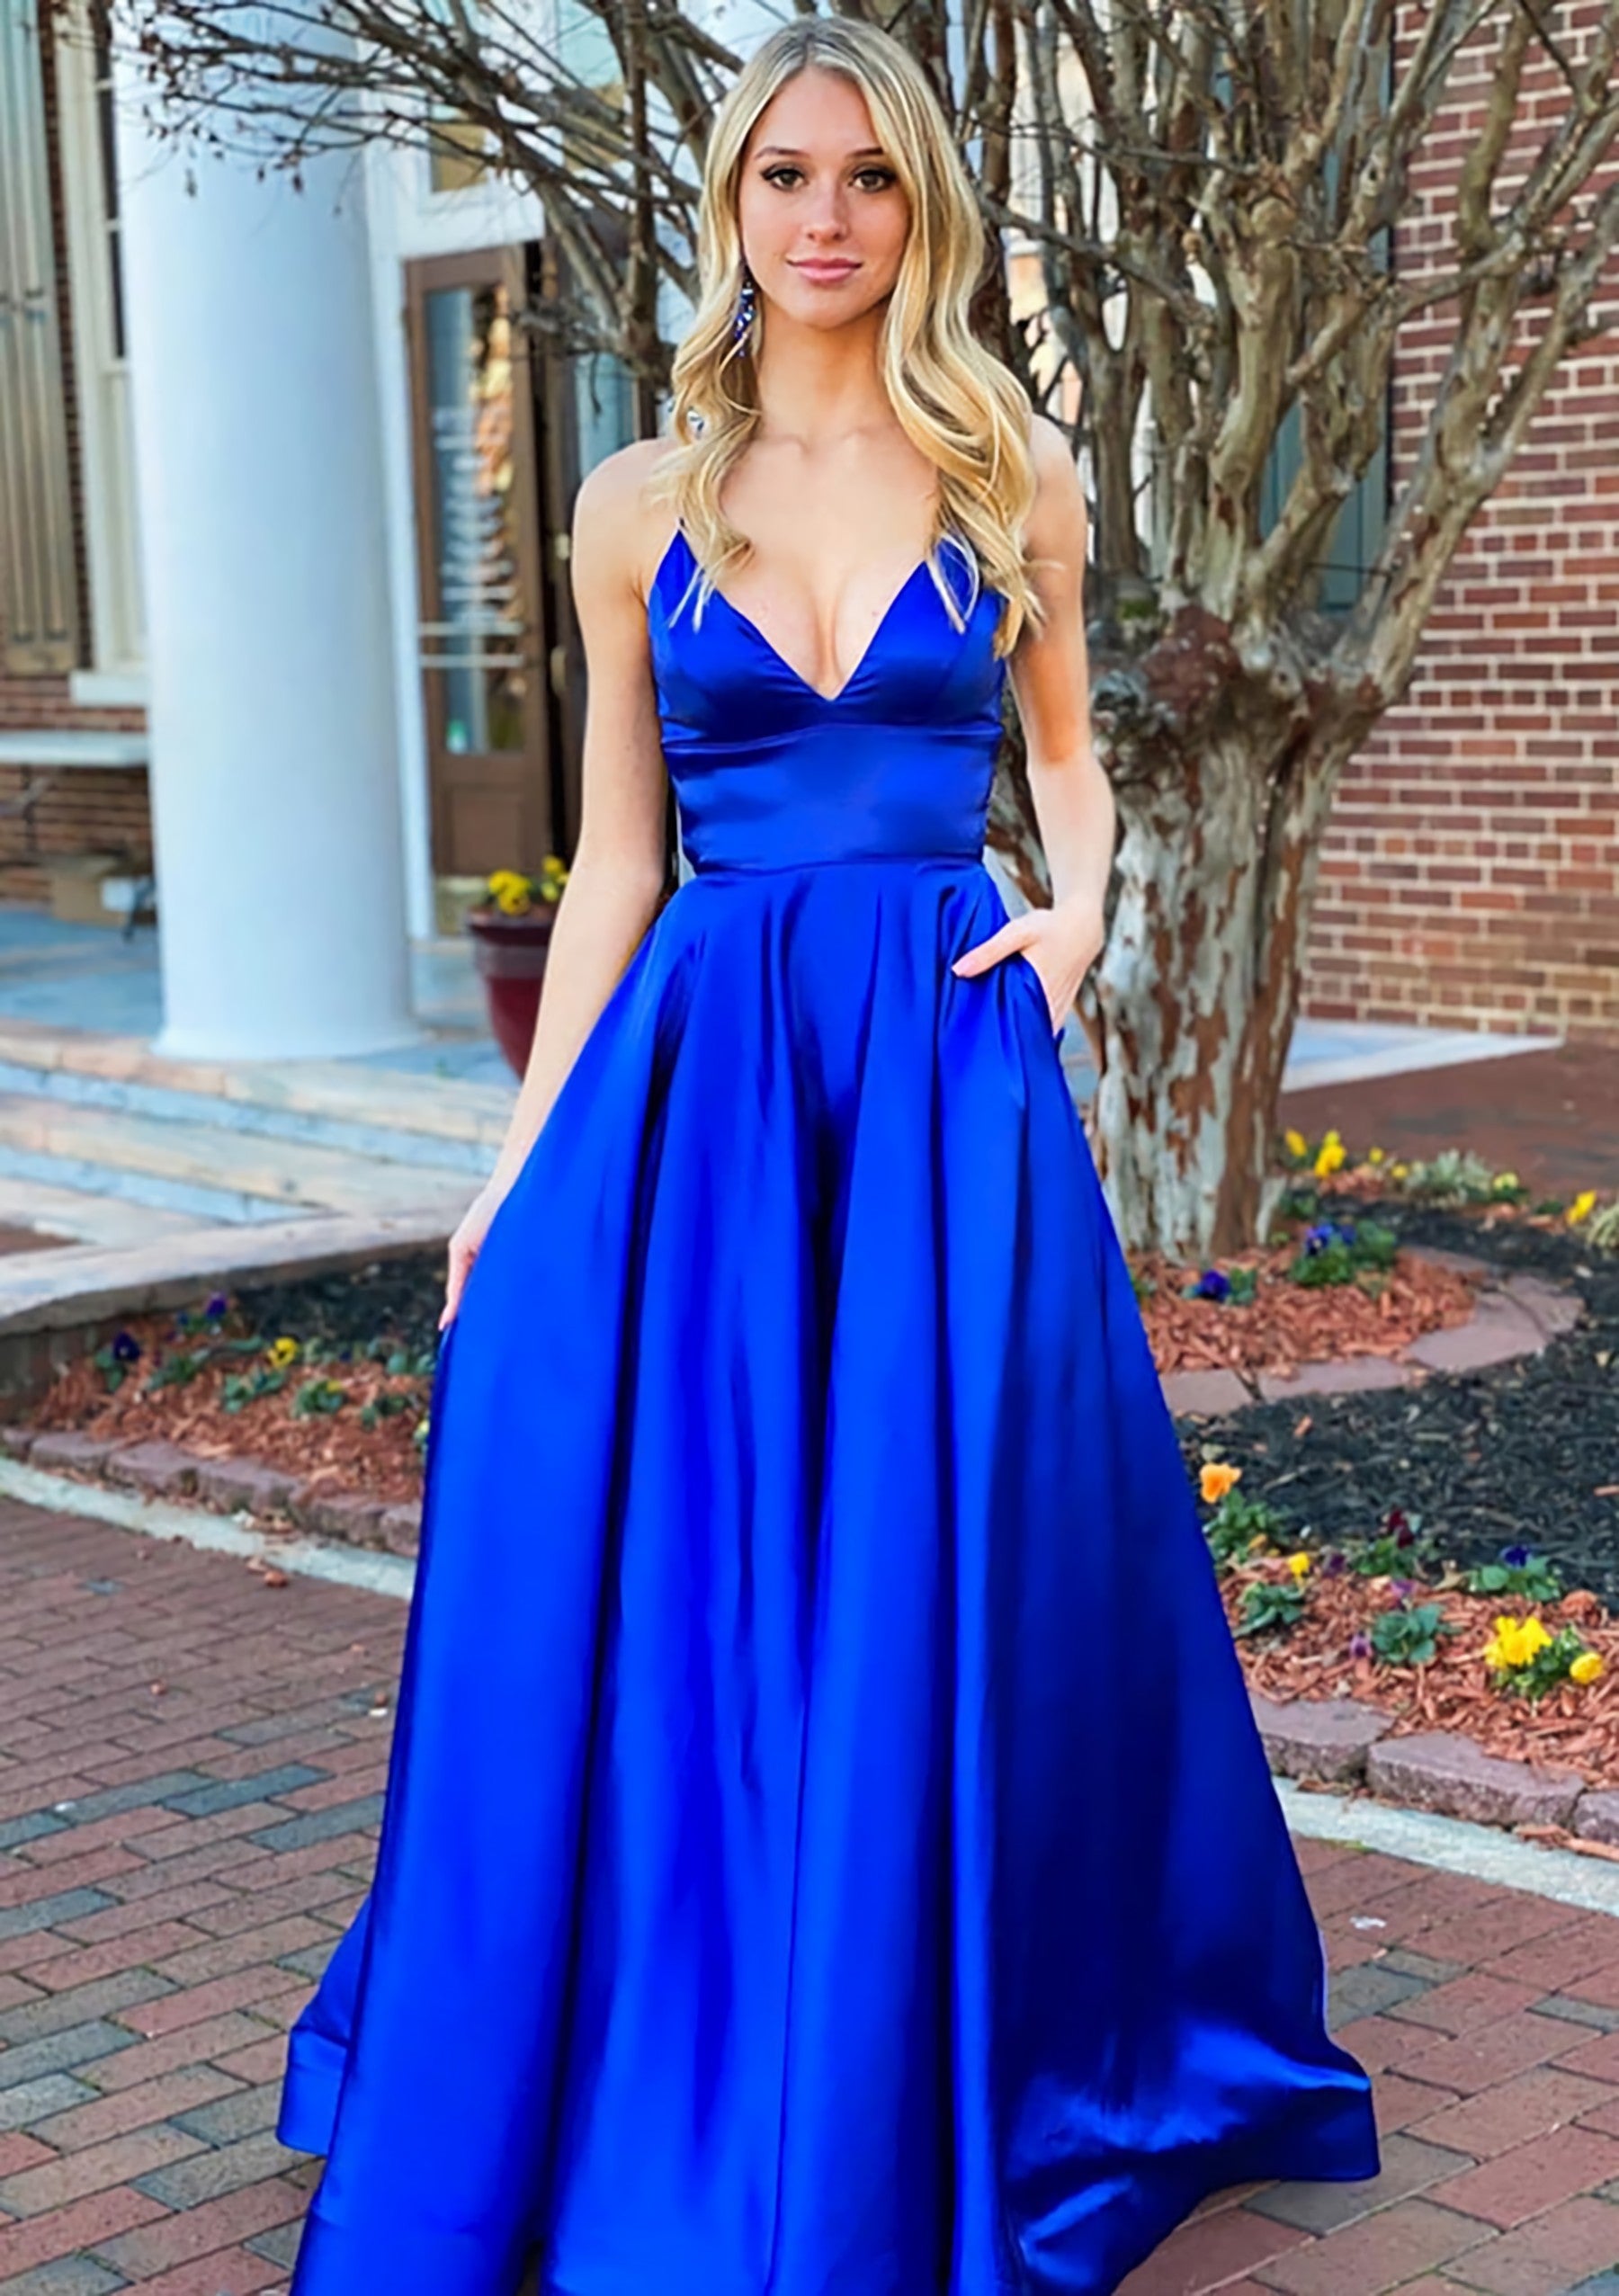 A Line V Neck Sleeveless Charmeuse Long Floor Length Prom Dress Outfits For Women With Pockets